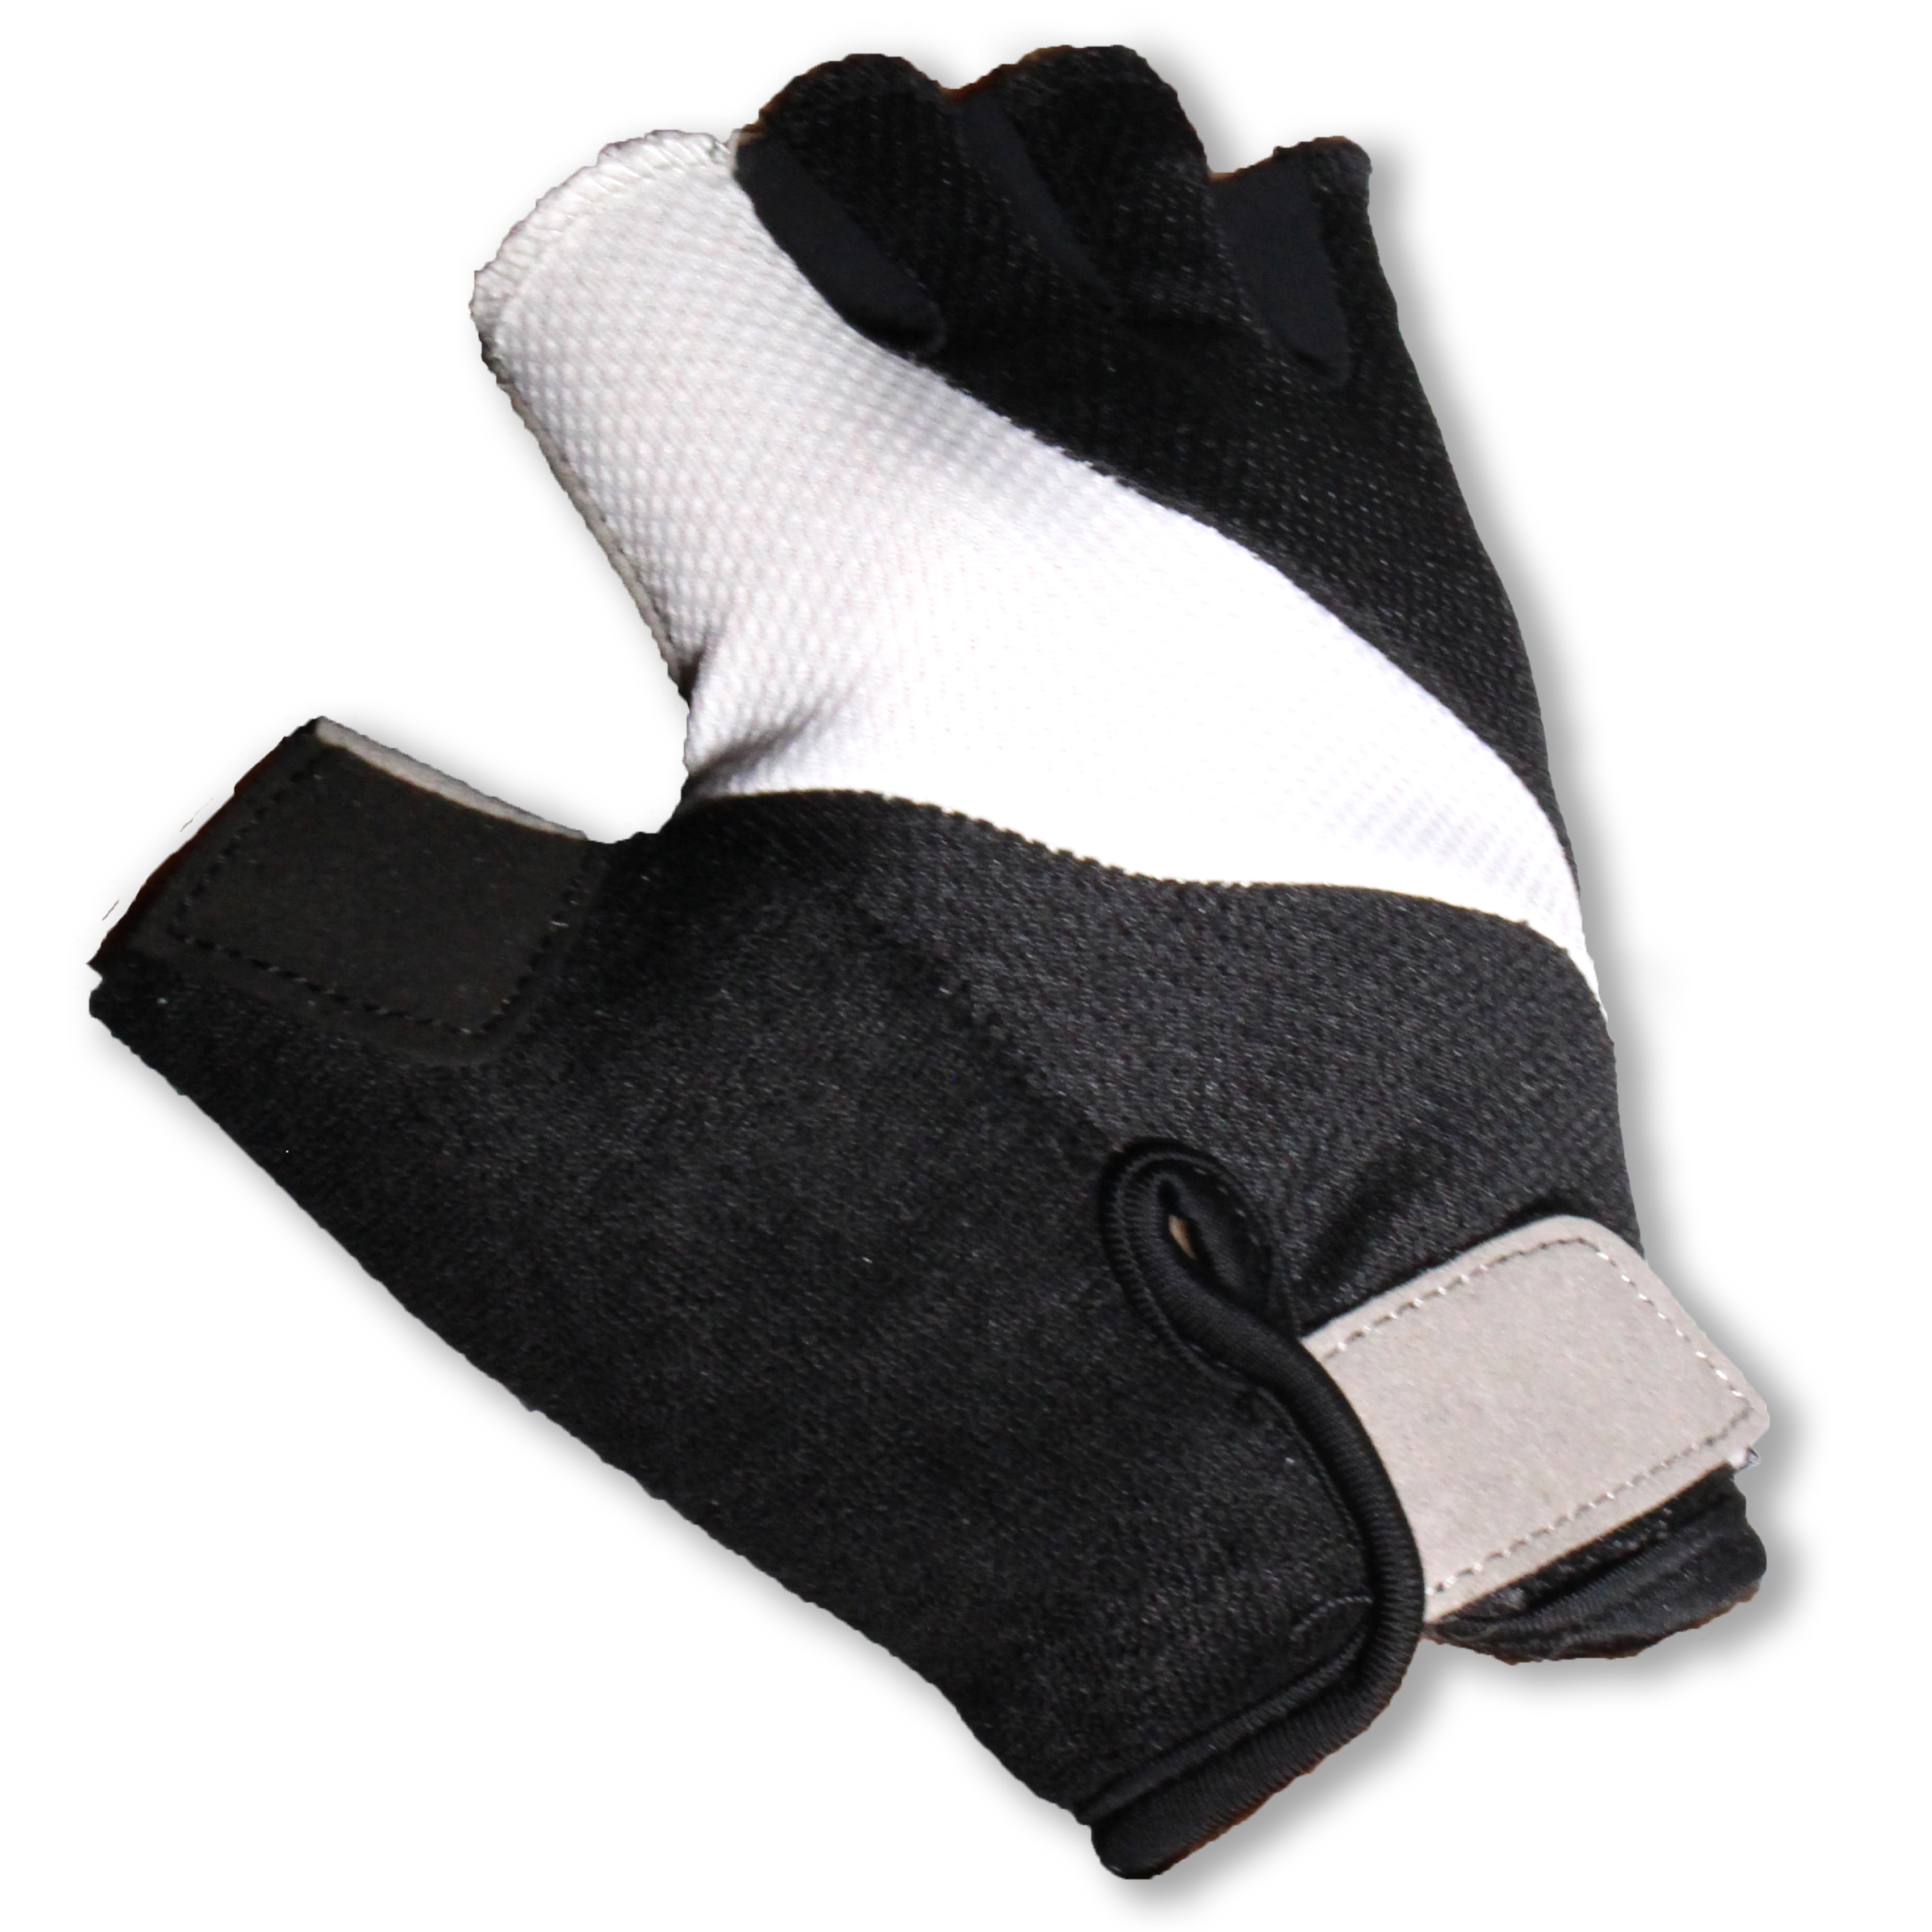 Cycling Fingerless Gloves with SBR padding (eVCom®)